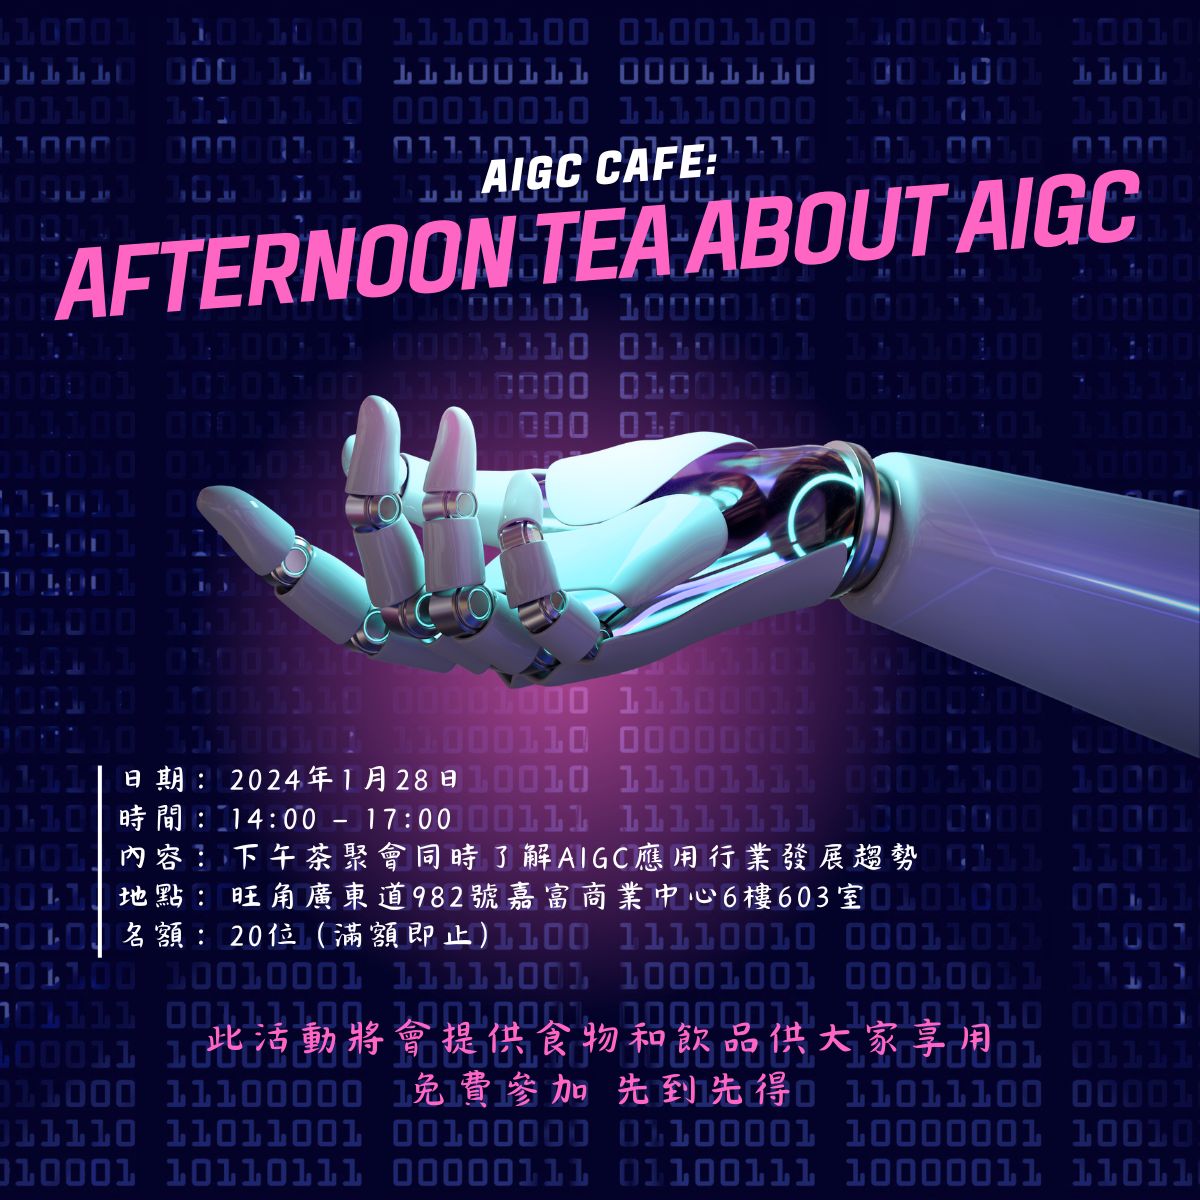 AIGC CAFE : AFTERNOON TEA ABOUT AIGC